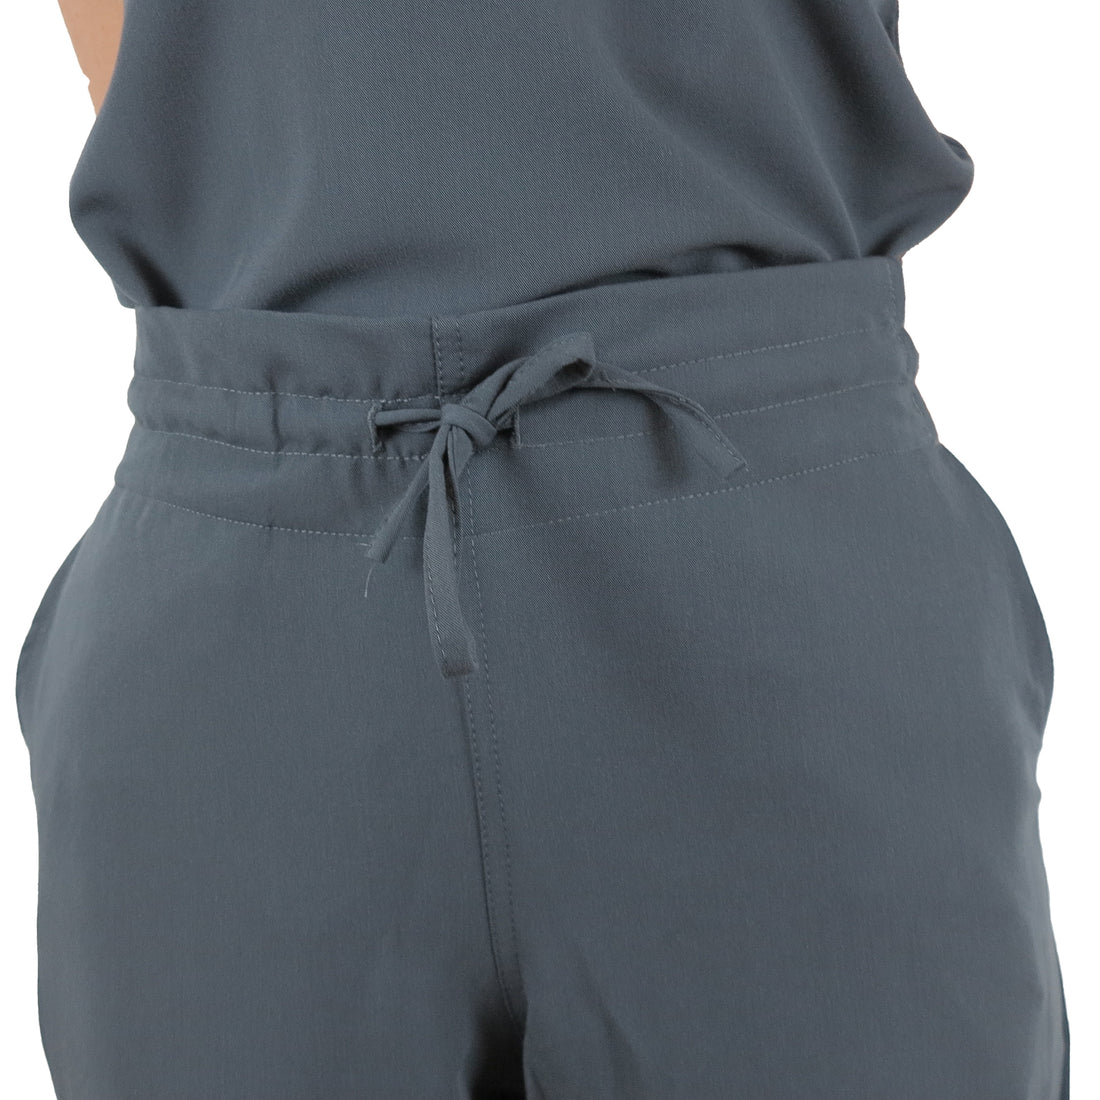 Medical Scrubs | Everything You Need to Know